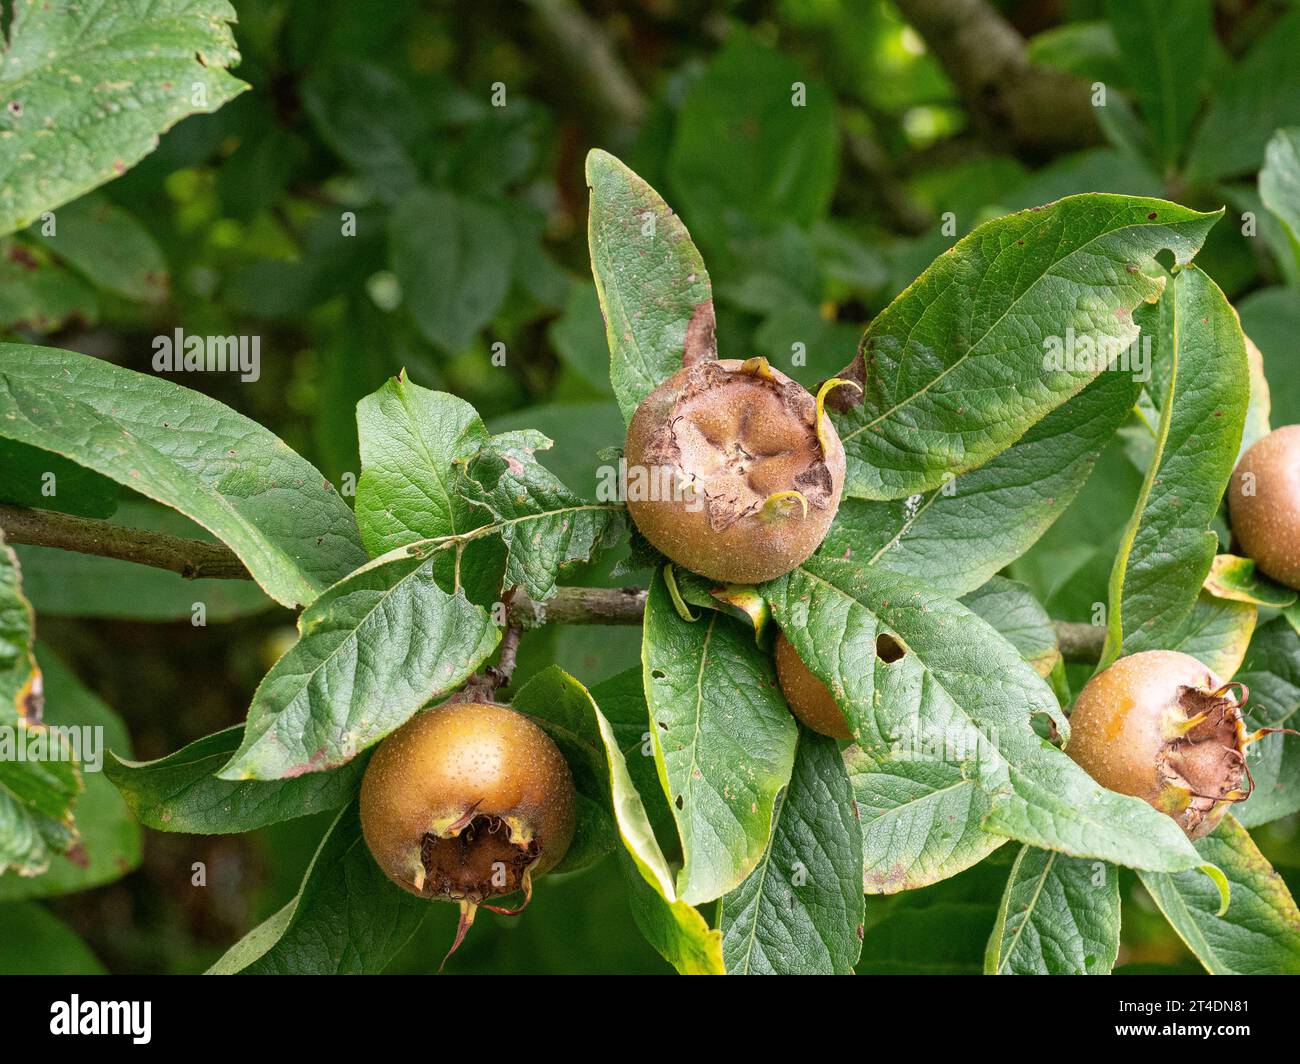 The shiny green leaves and rough round fruit of the Medlar - Mespilus germanica Stock Photo